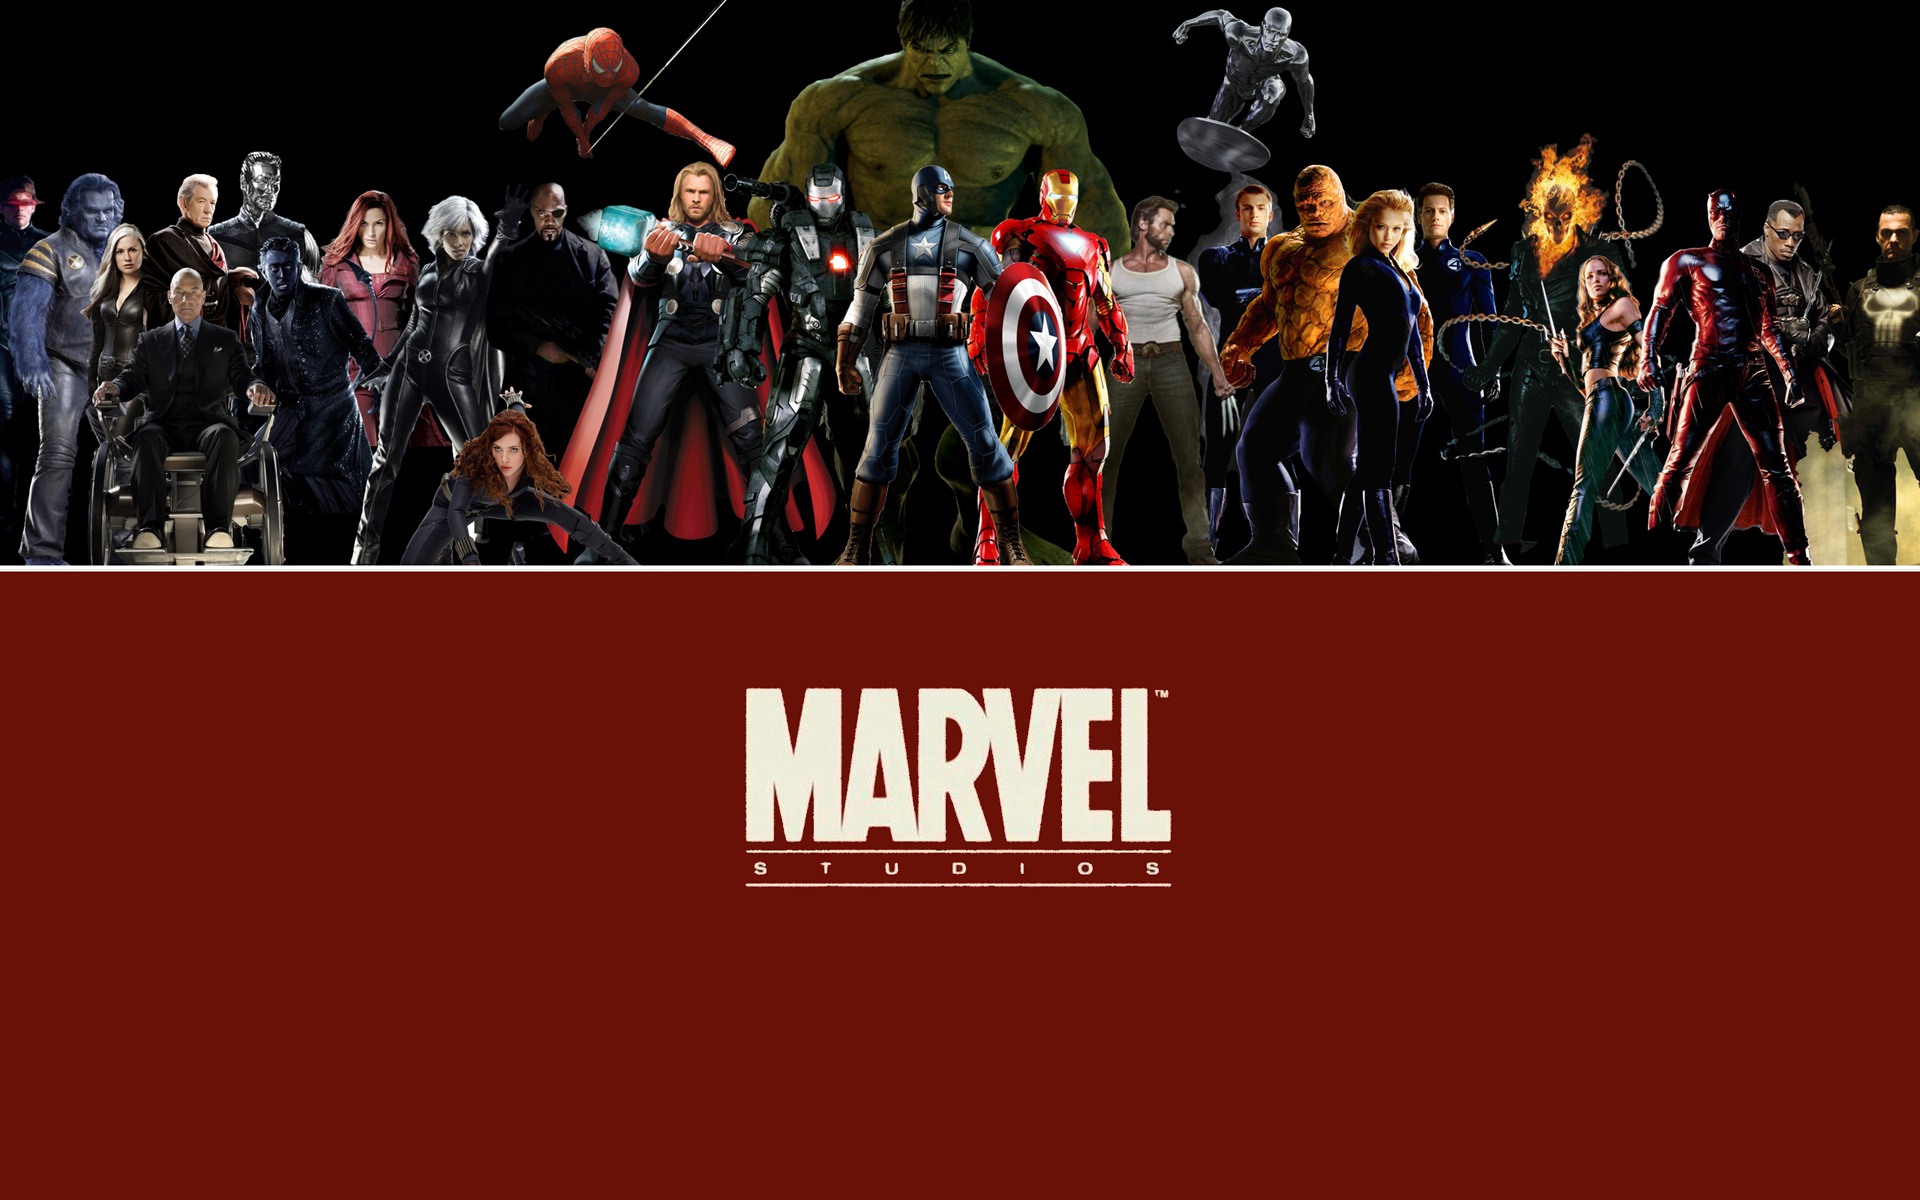 Download wallpaper for 1080x1920 resolution | Avengers Marvel Studio Image  HD | movies and tv series | Wallpaper Better